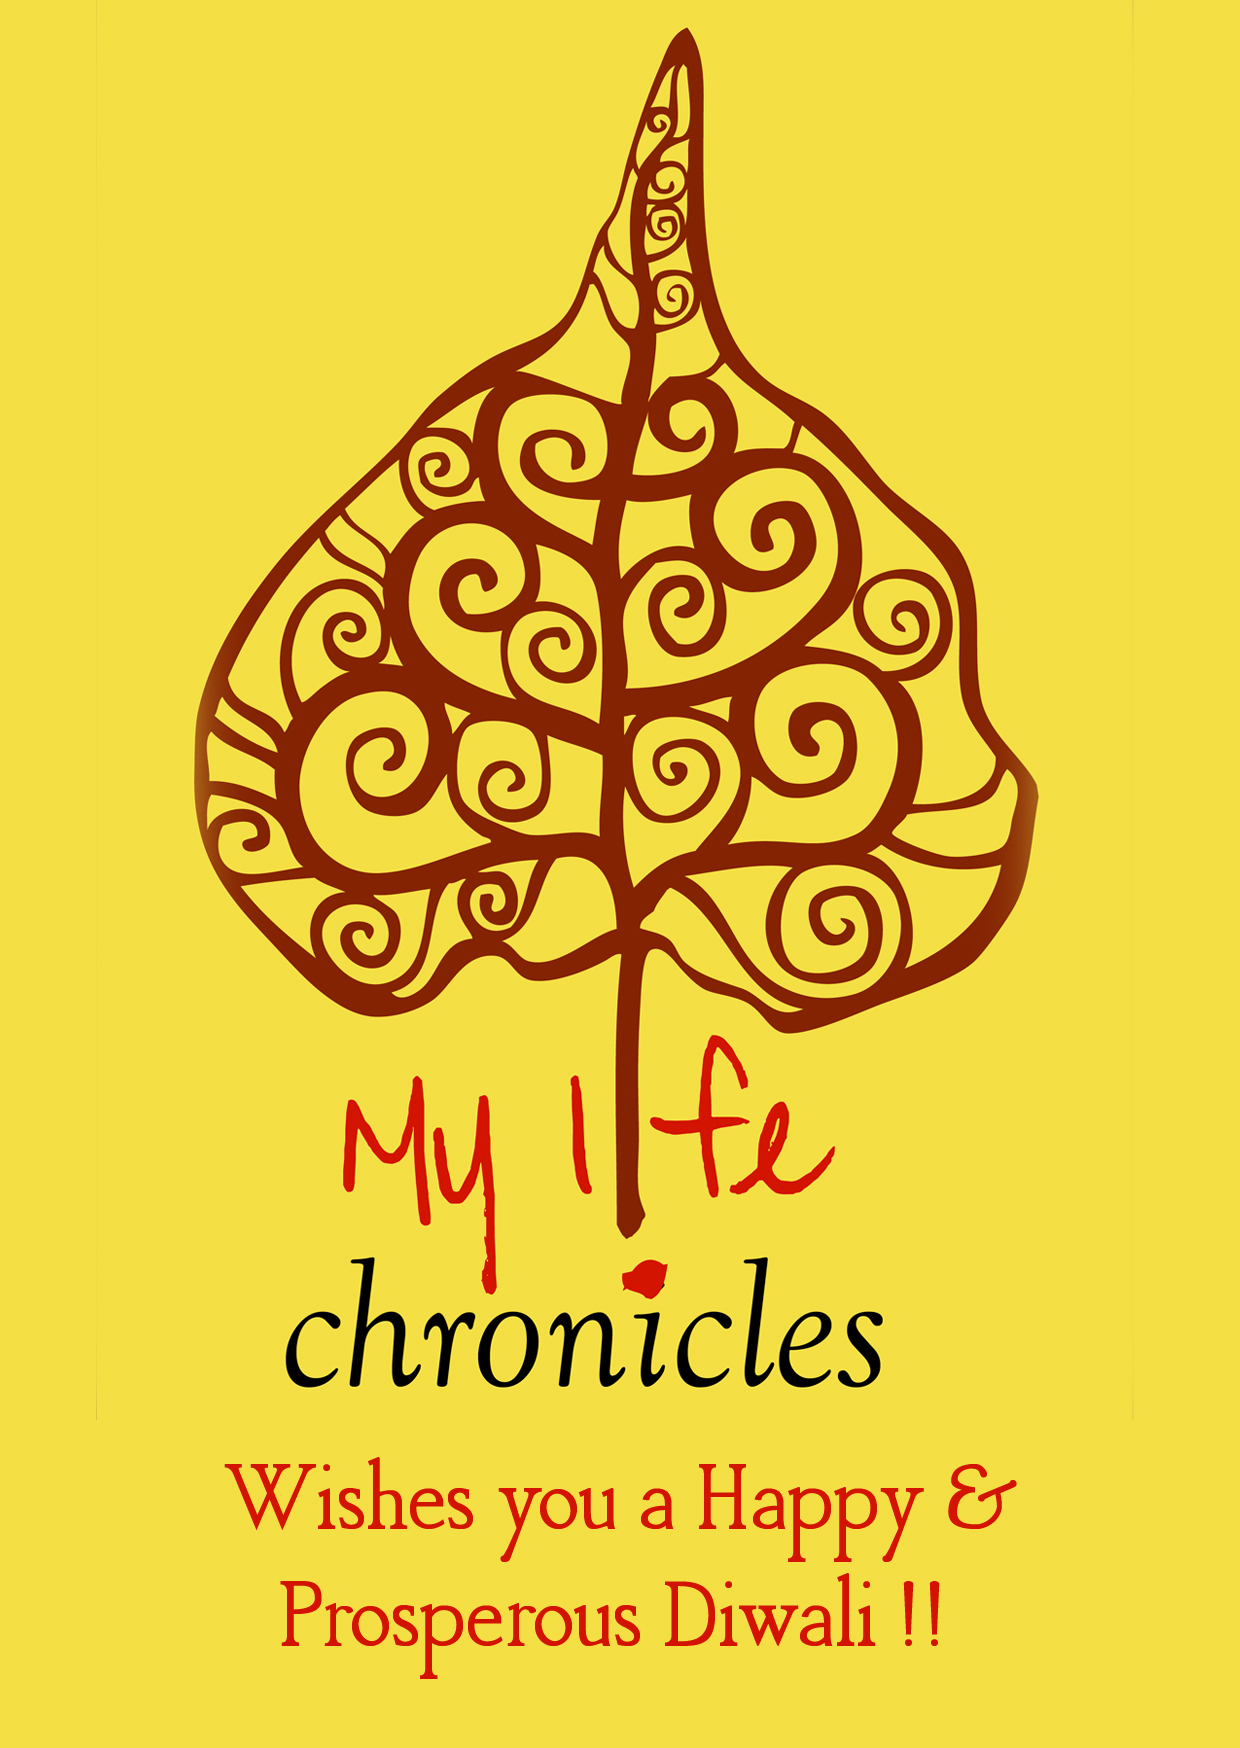 Diwali greetings from My Life Chronicles